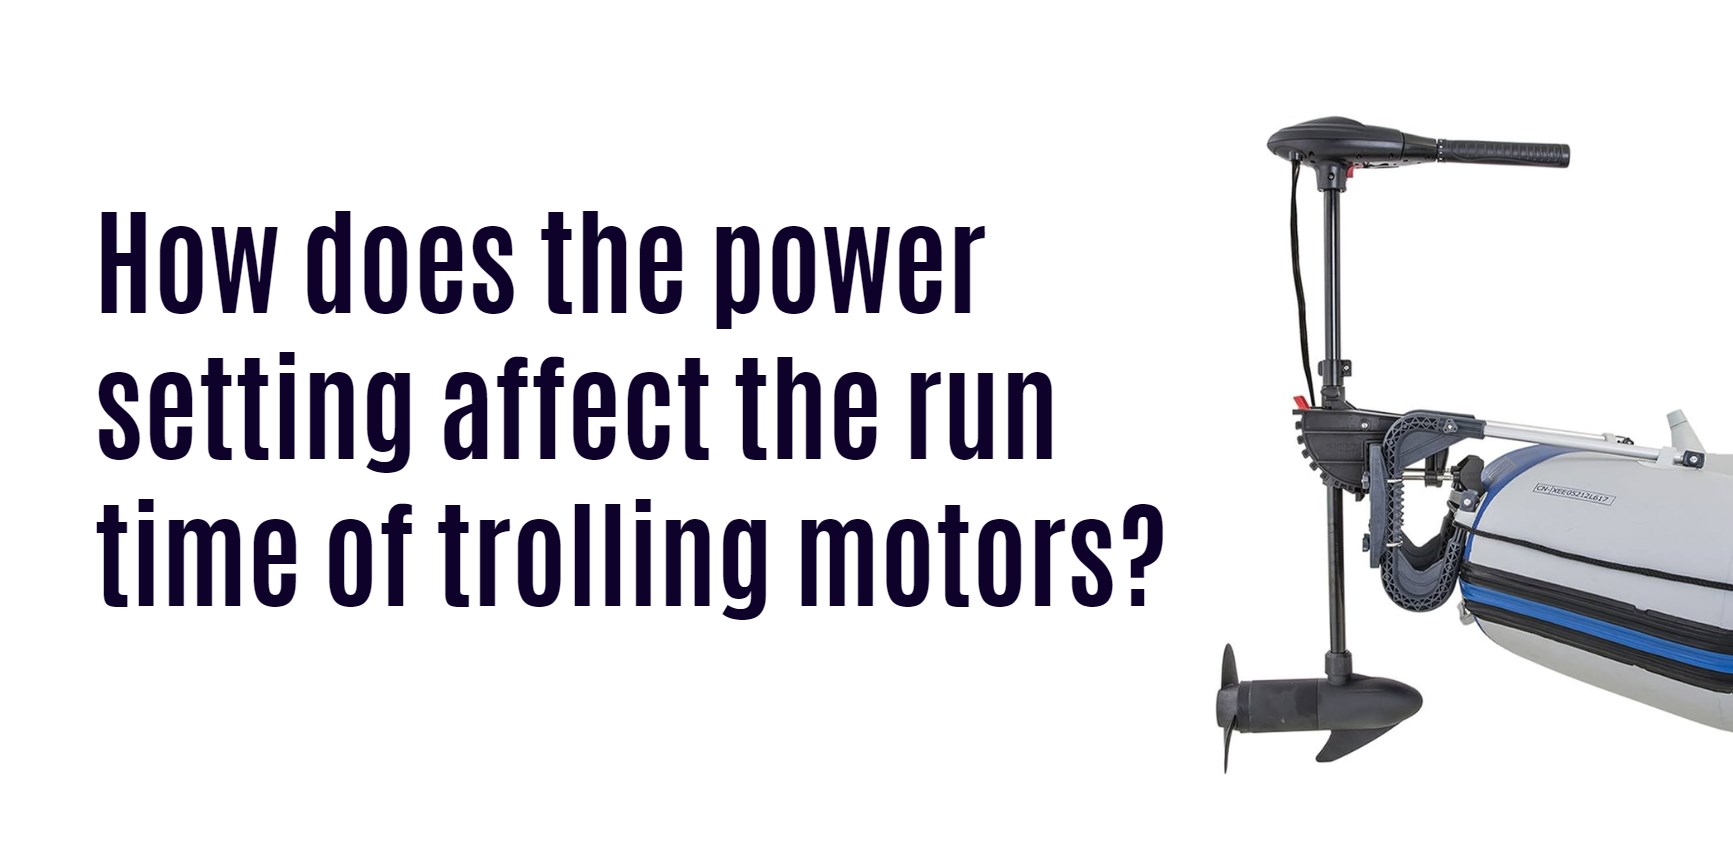 How does the power setting affect the run time of trolling motors?